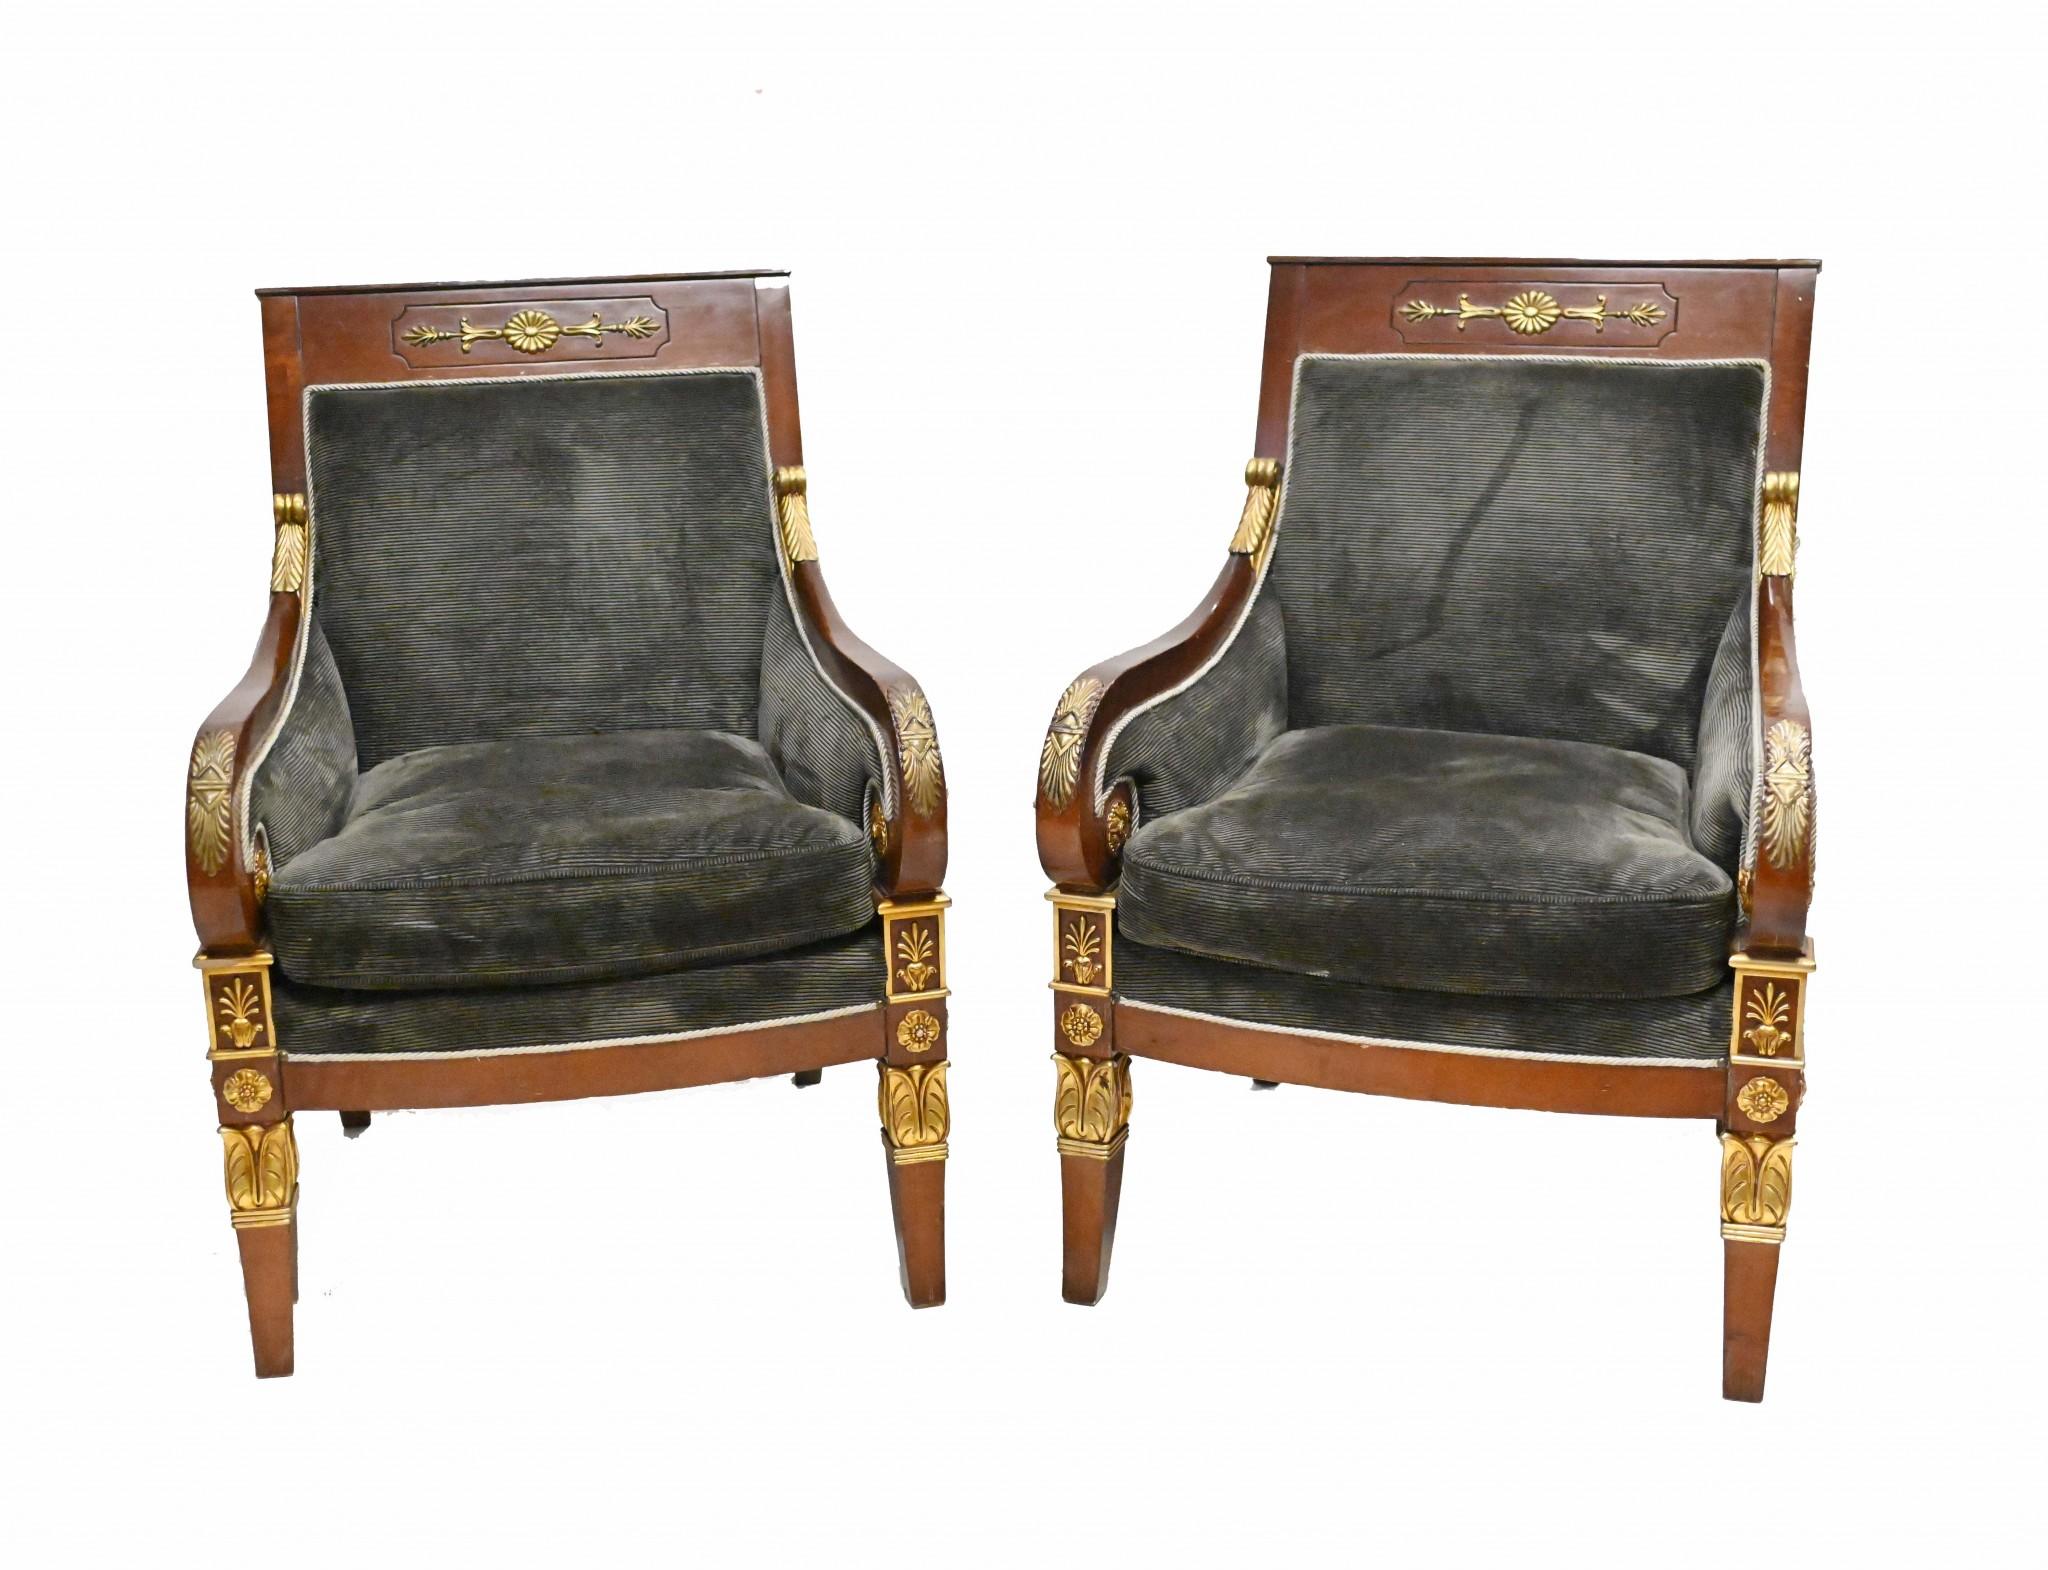 Classic pair of high Empire French arm chairs
Very sturdy and comfortable to sit in
Classic Empire motifs carved and finished in gilt including acanthus leaves and rosettes
Bought from a dealer on Marche Biron at Paris antiques markets Circa